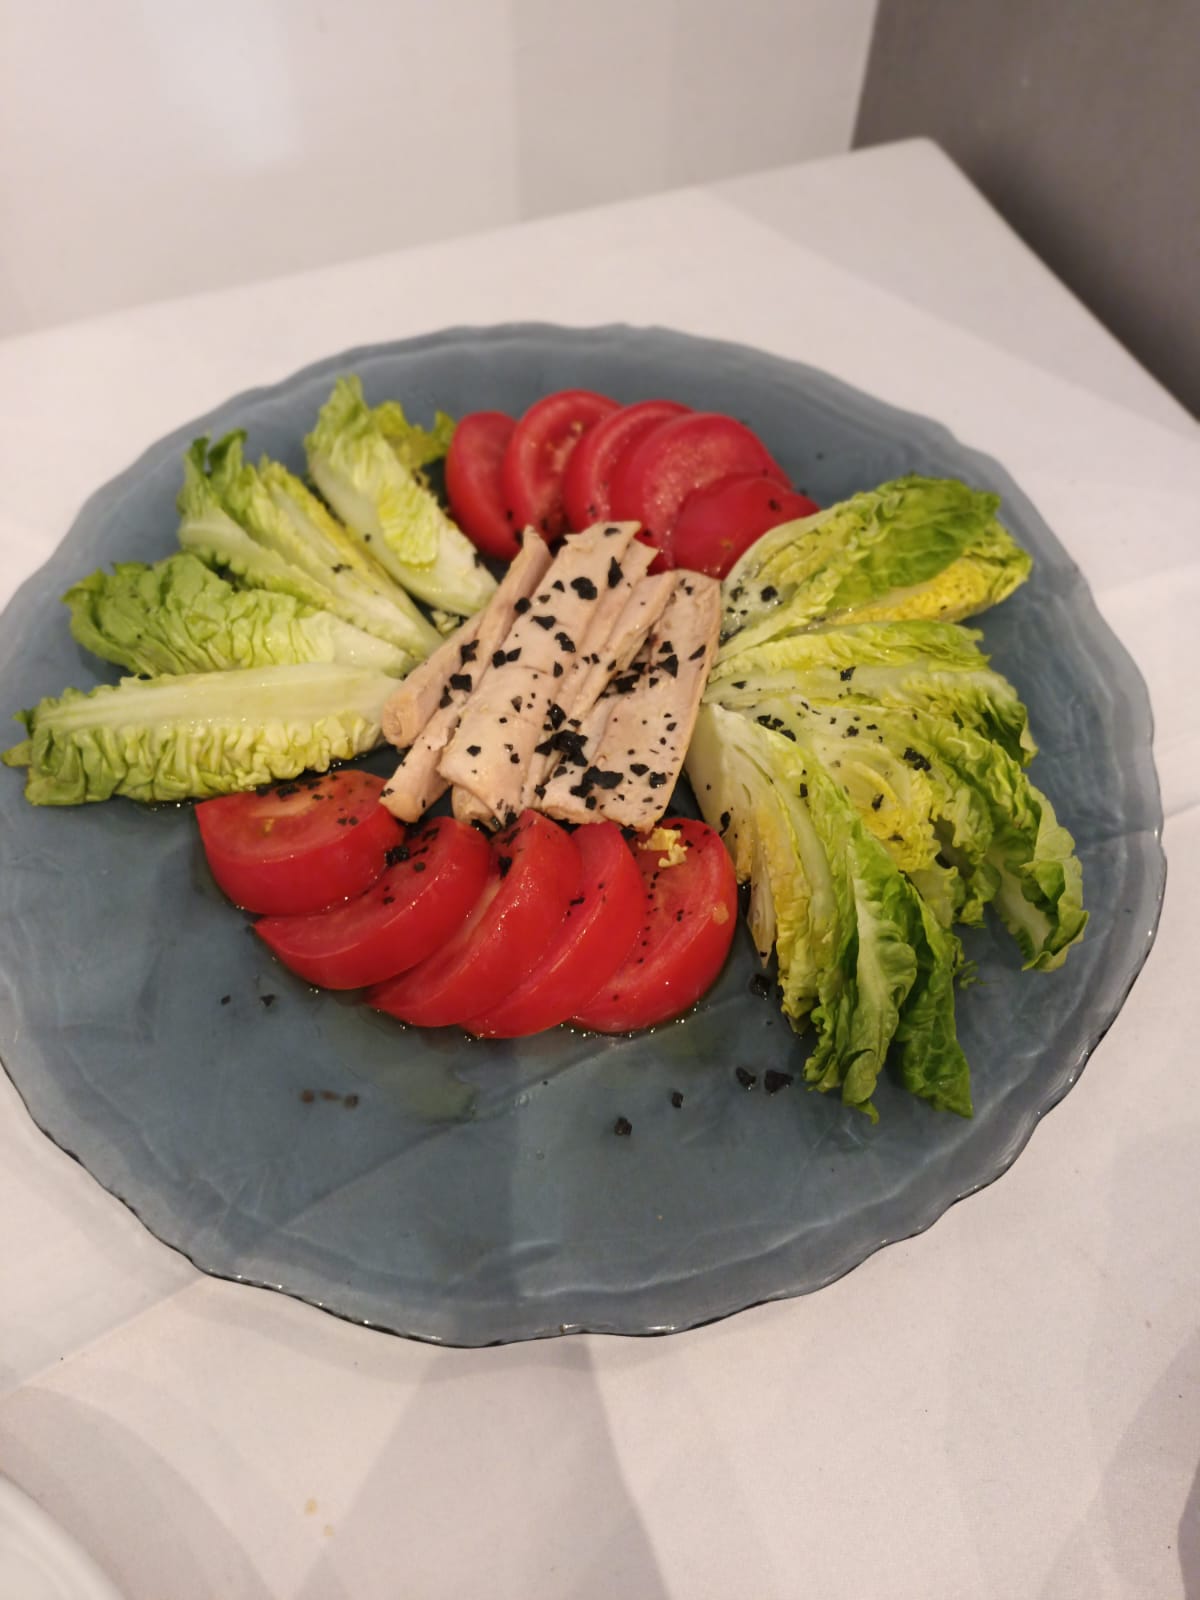 Lettuce hearts with tomato and anchovies